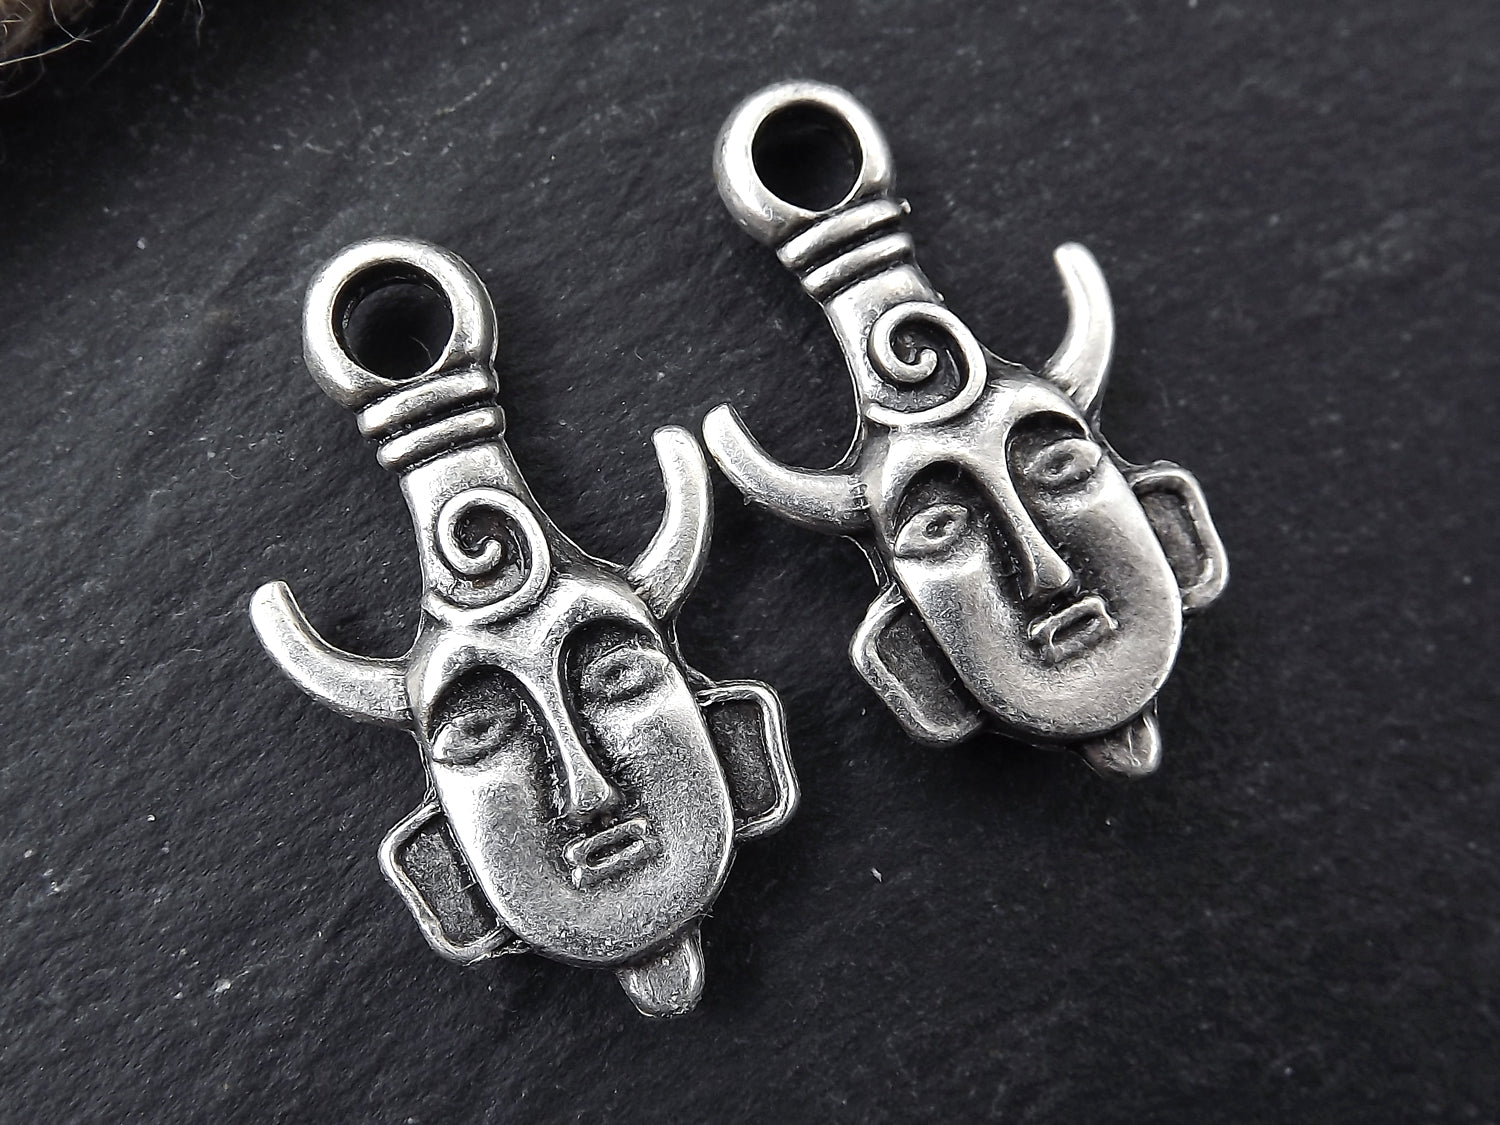 Tribal Ethnic Mask Pendant Charms - African Mask with Horns - Matte Antique Silver Plated - 2PC